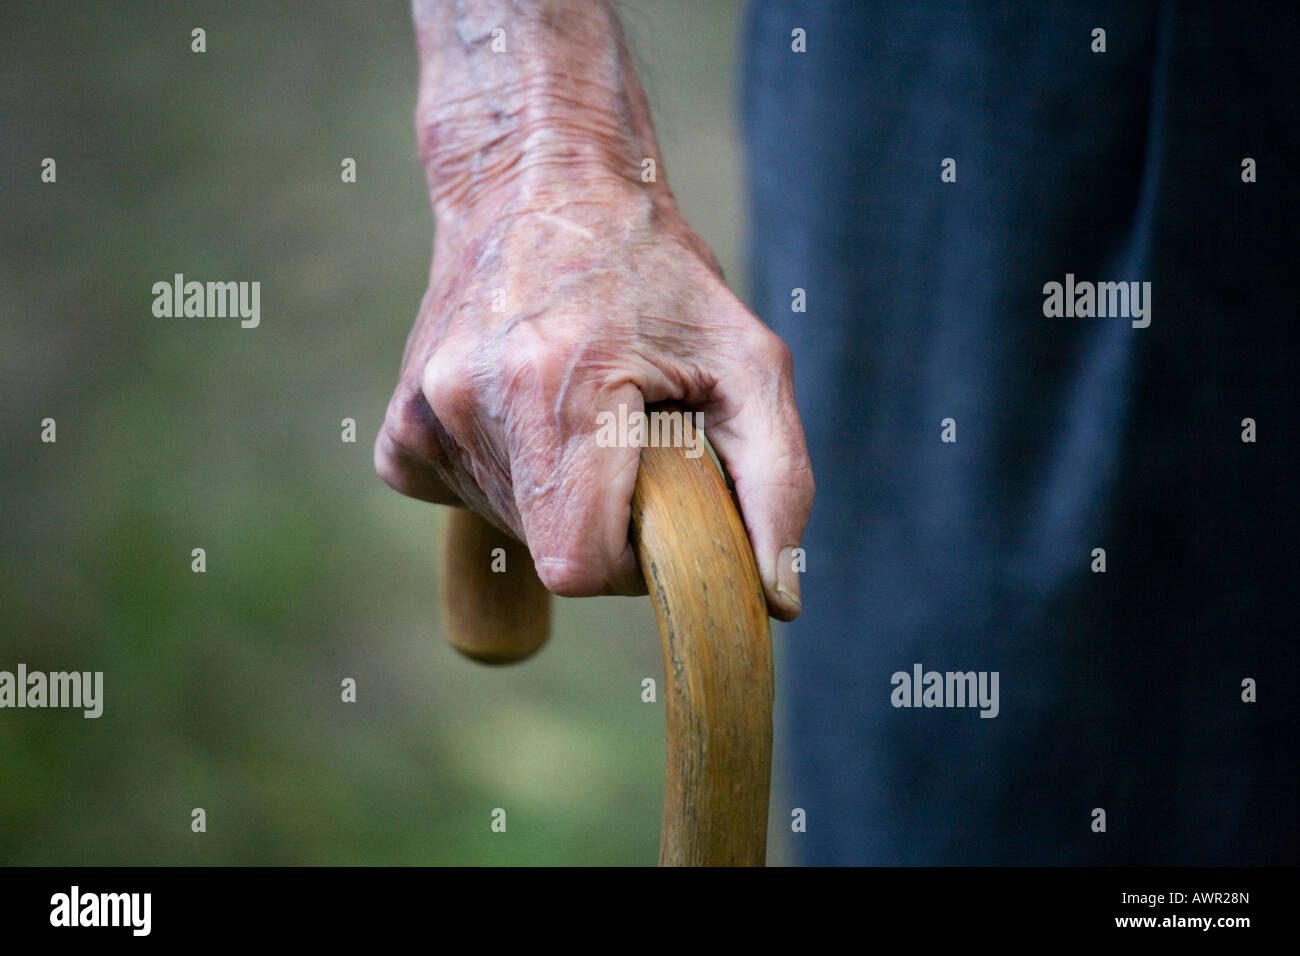 Elderly person's hand resting on a cane, geriatric care Stock Photo